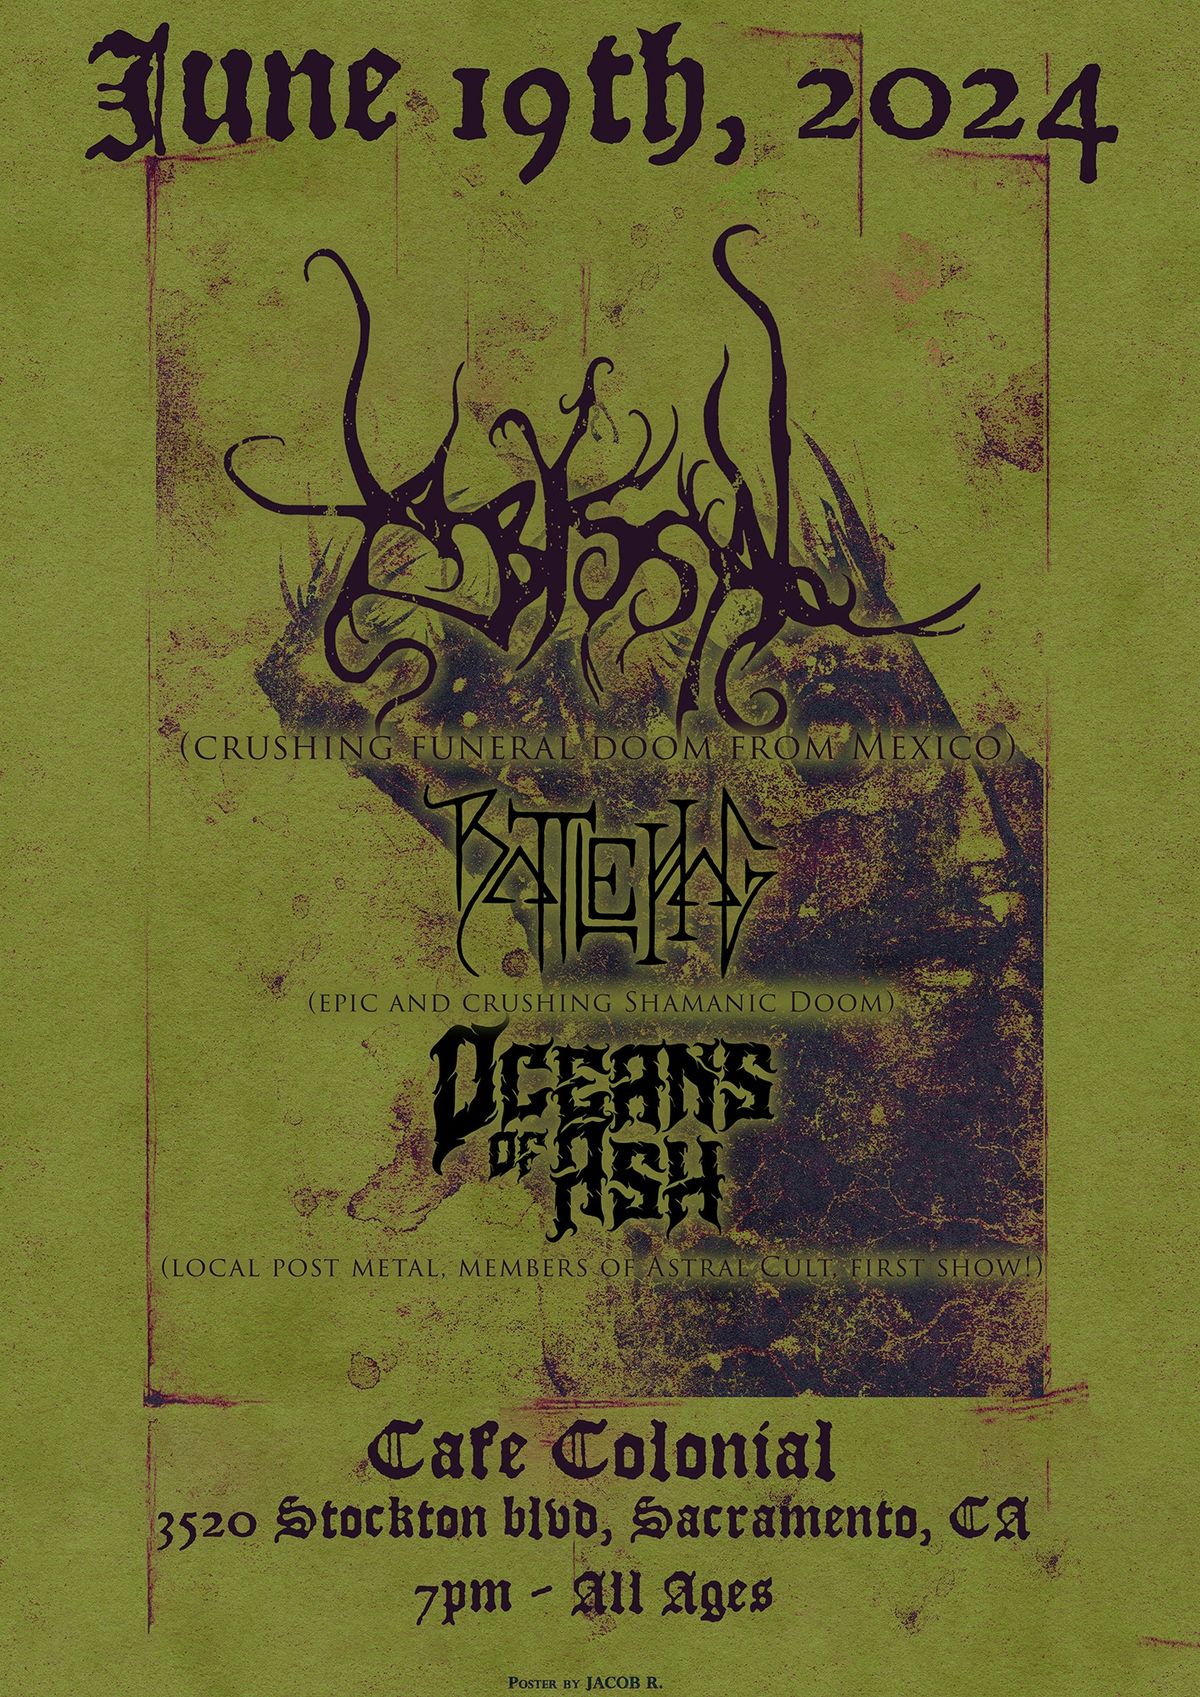 Abyssal (TJ, MX) with Battle Hag and Oceans of Ash